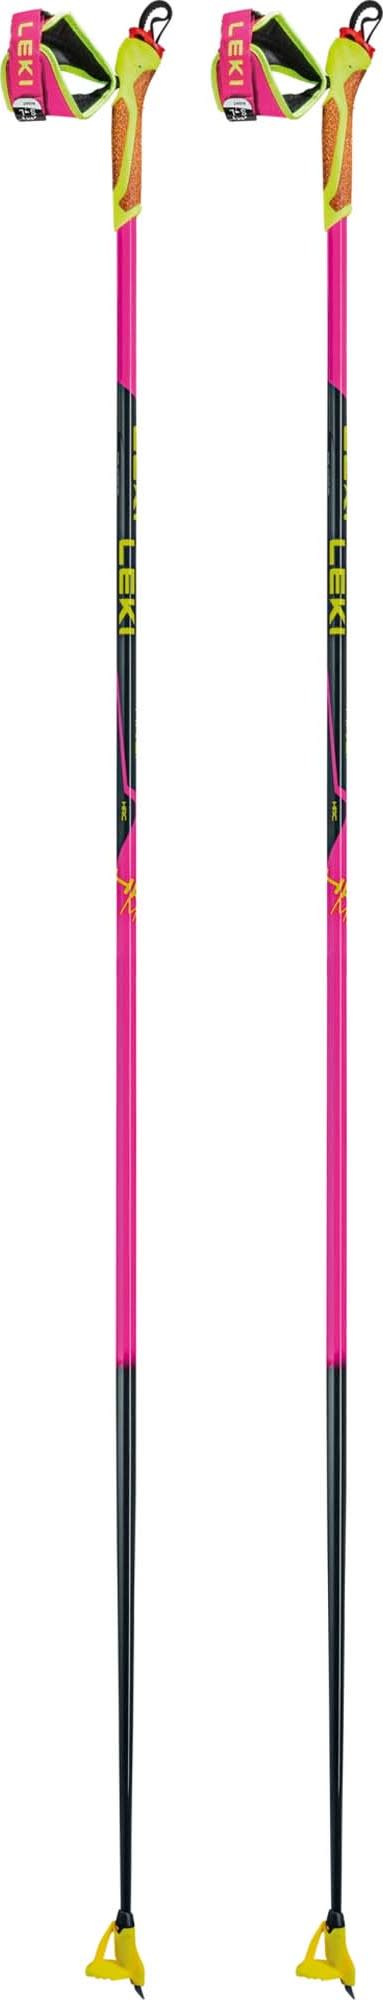 HRC Max FRT Neonpink-Neonyellow-Carbon Structure